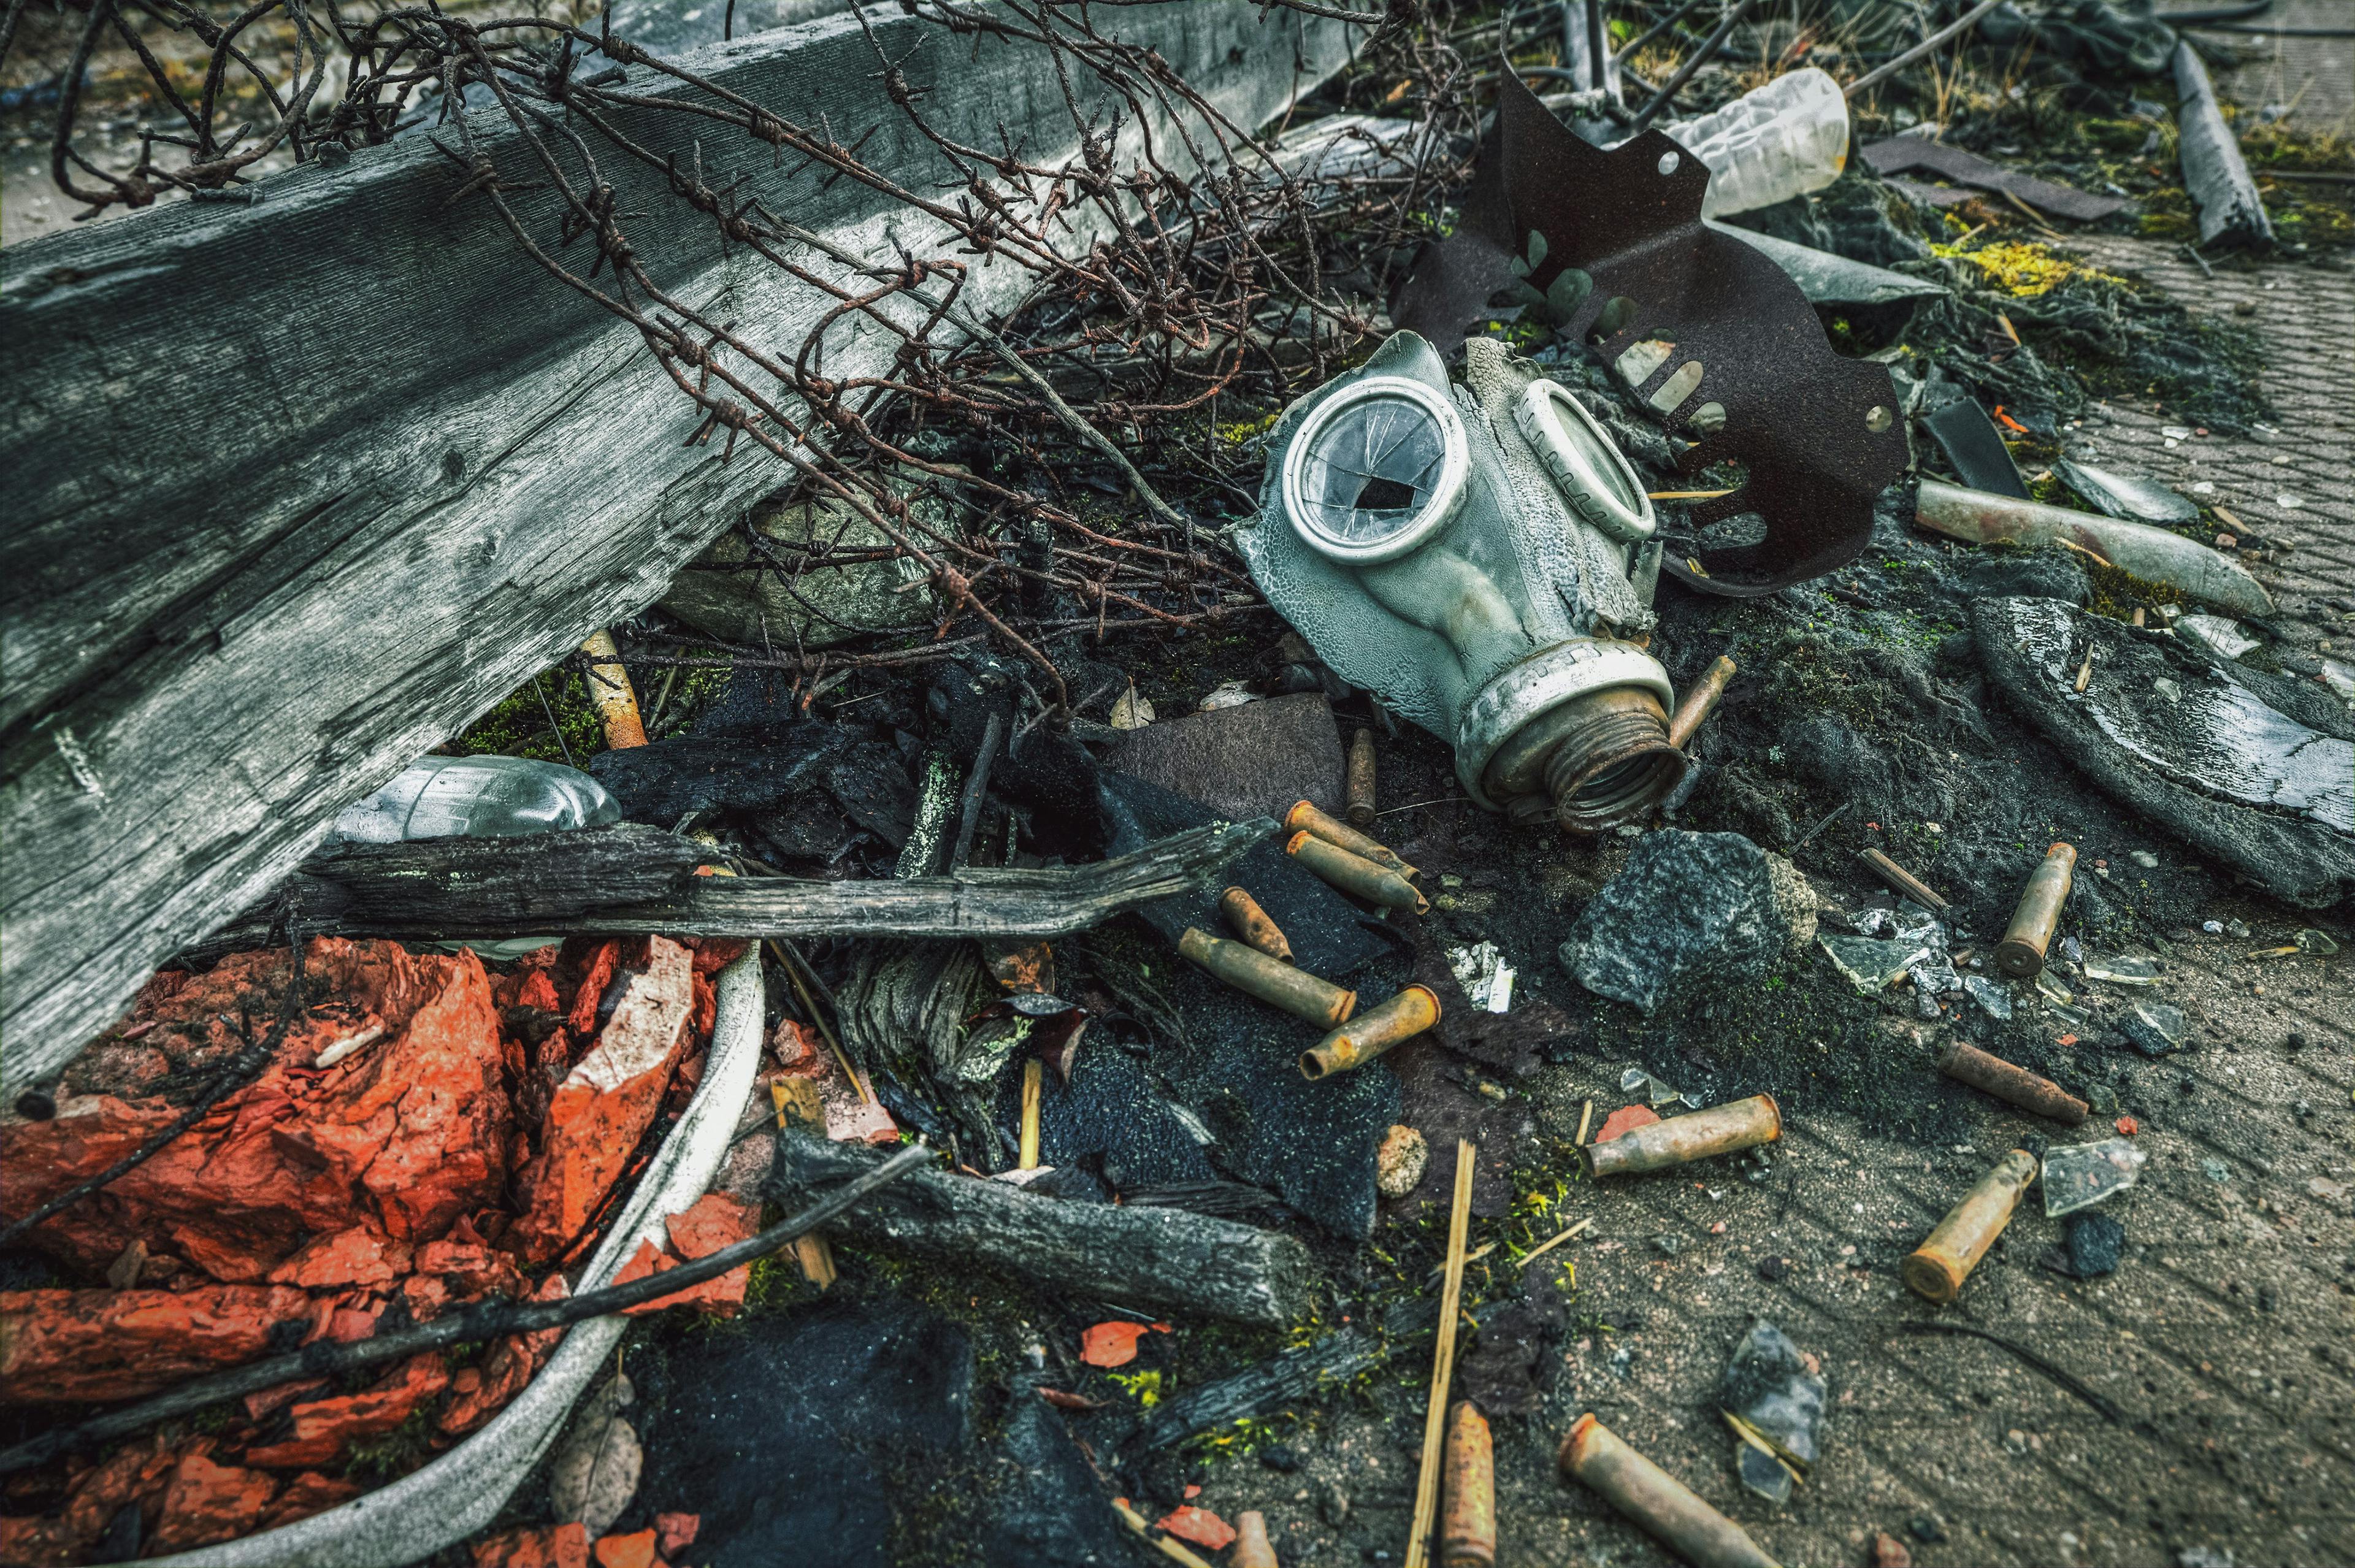 After a nuclear war. The old gas mask and ammunition among the ruins | Image Credit: © nouskrabs - stock.adobe.com